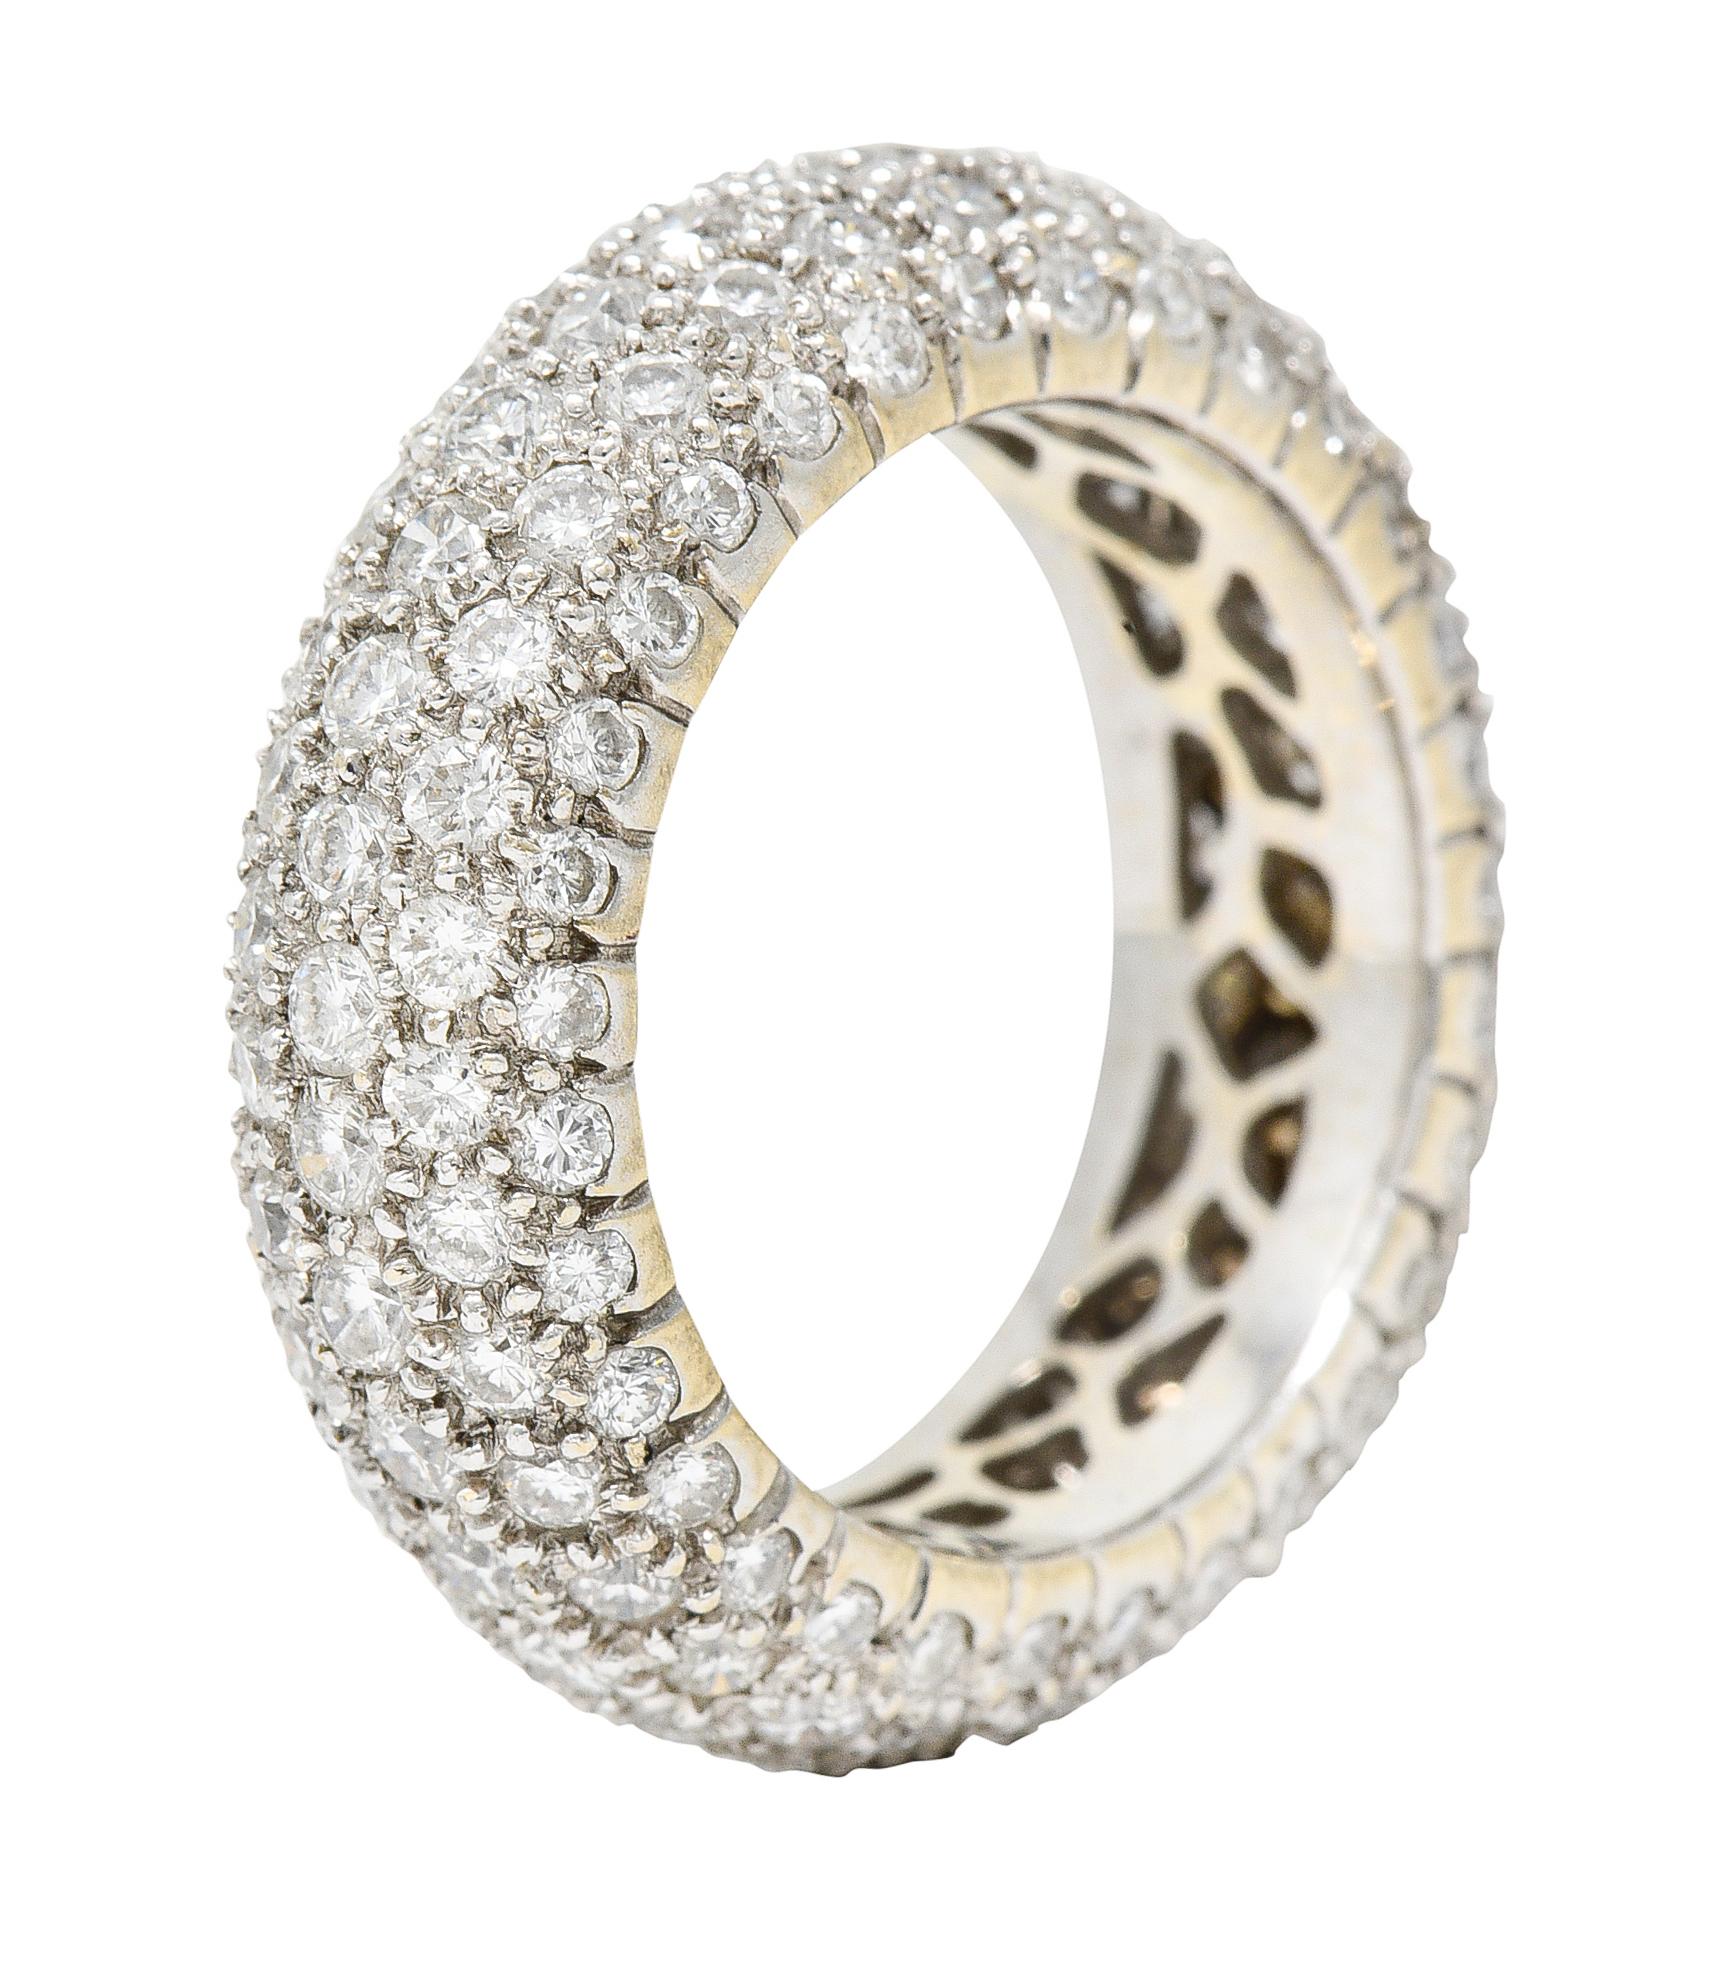 Band ring is designed with a rounded and dome-like curvature

Pavè set fully around with round brilliant cut diamonds

Weighing in total approximately 3.50 carats - G to I color with overall VS clarity

Completed by a pierced interior

Tested as 18